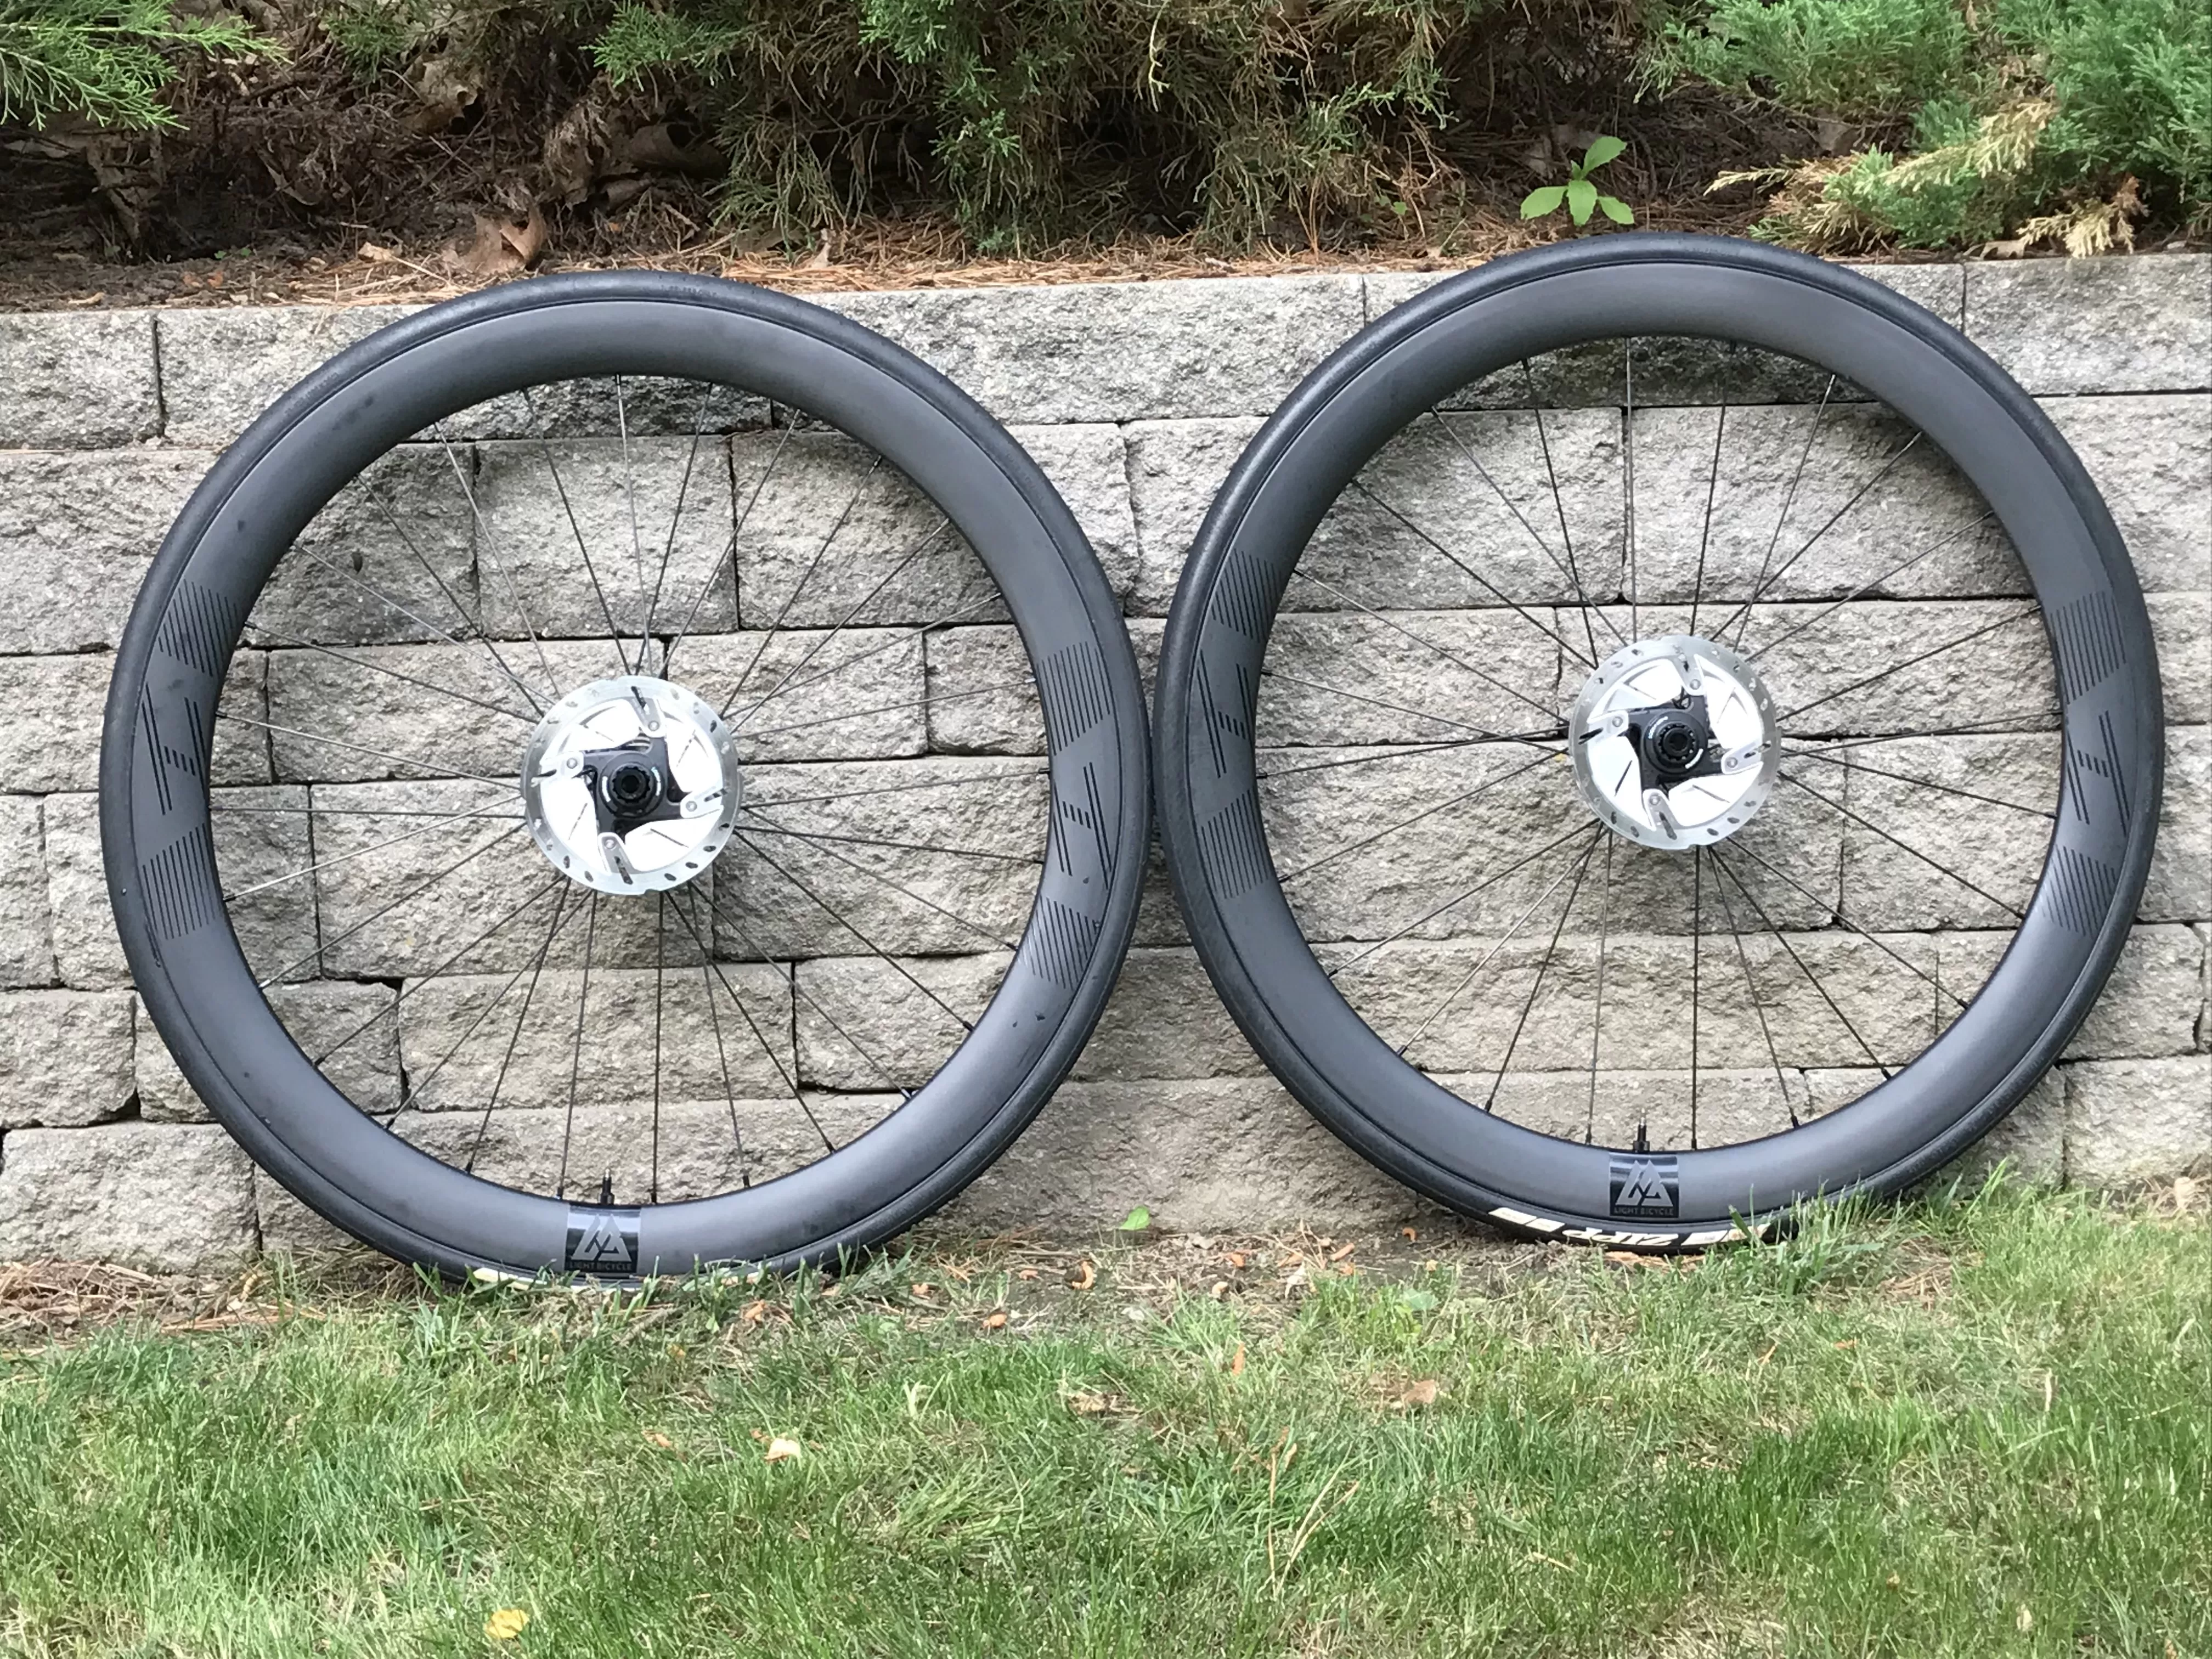 THE BEST VALUE CARBON WHEELSET - In The Cycling